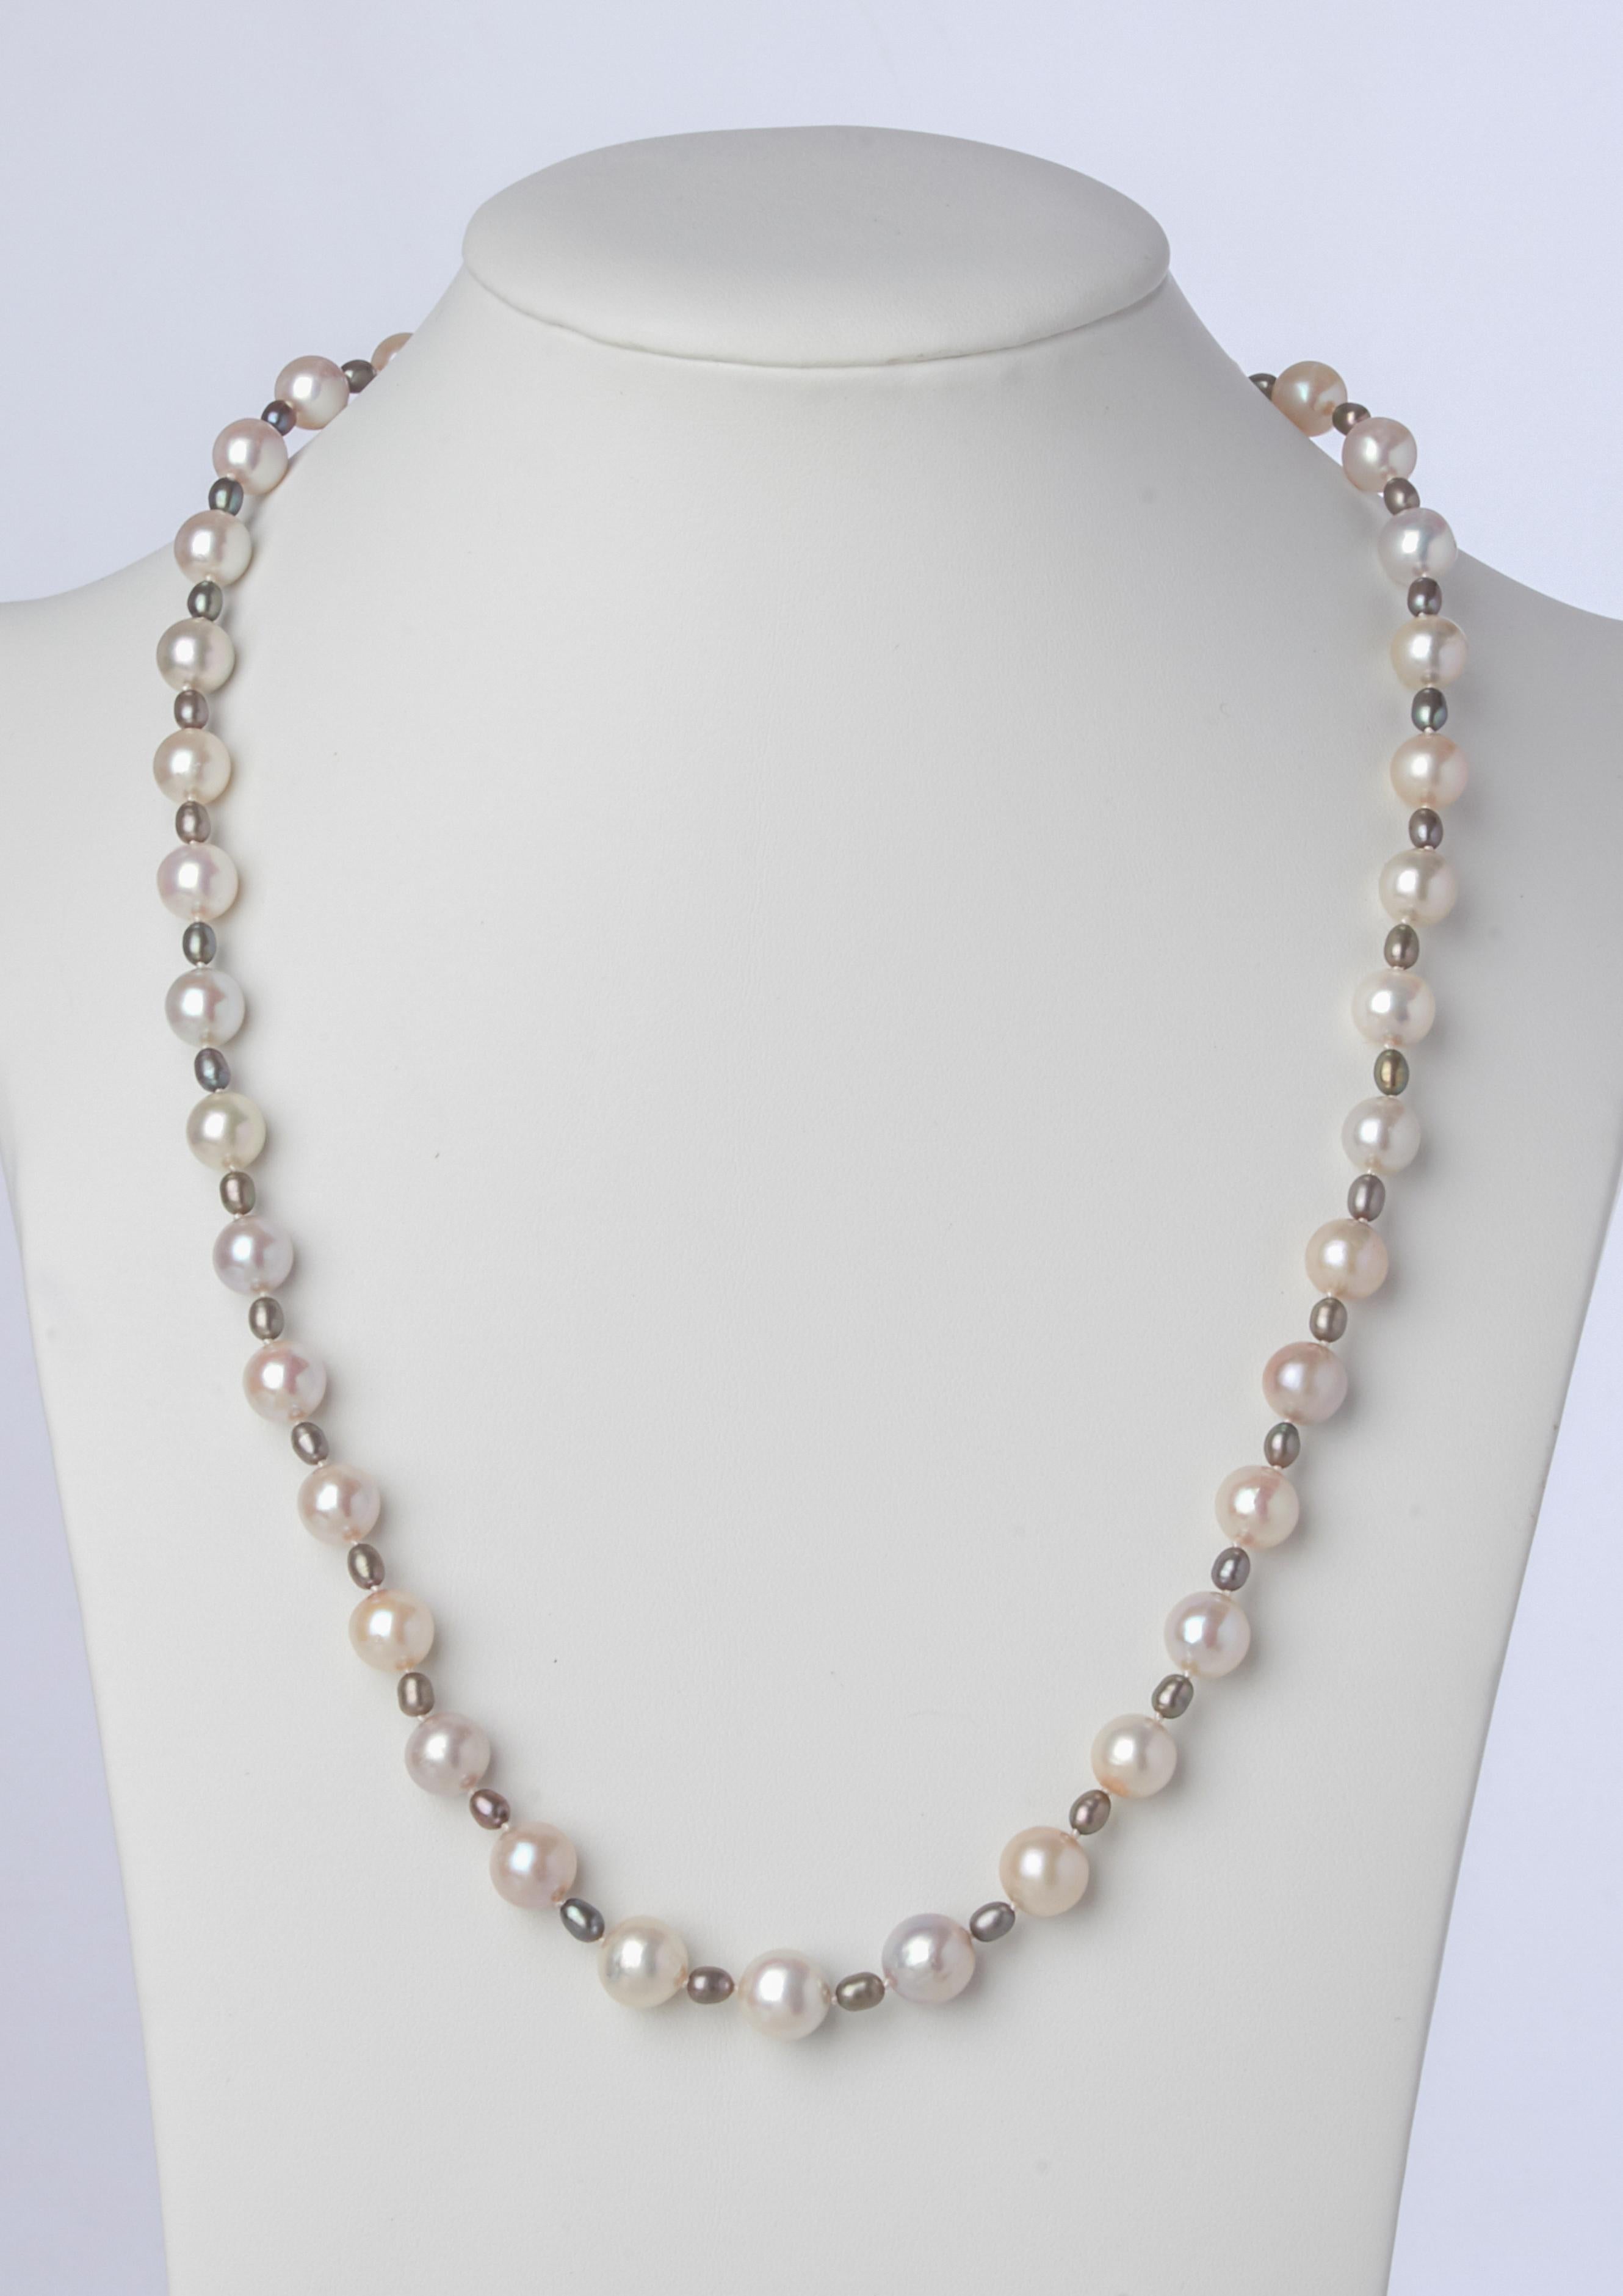 Stylish with the versatility of a soft neutral hues, this  hand-strung twenty two inch necklace is crafted of thirty eight white lustrous 8-3/4mm Akoya pearls, accented with petite gray off round pearls. The strand is finished with a sterling silver